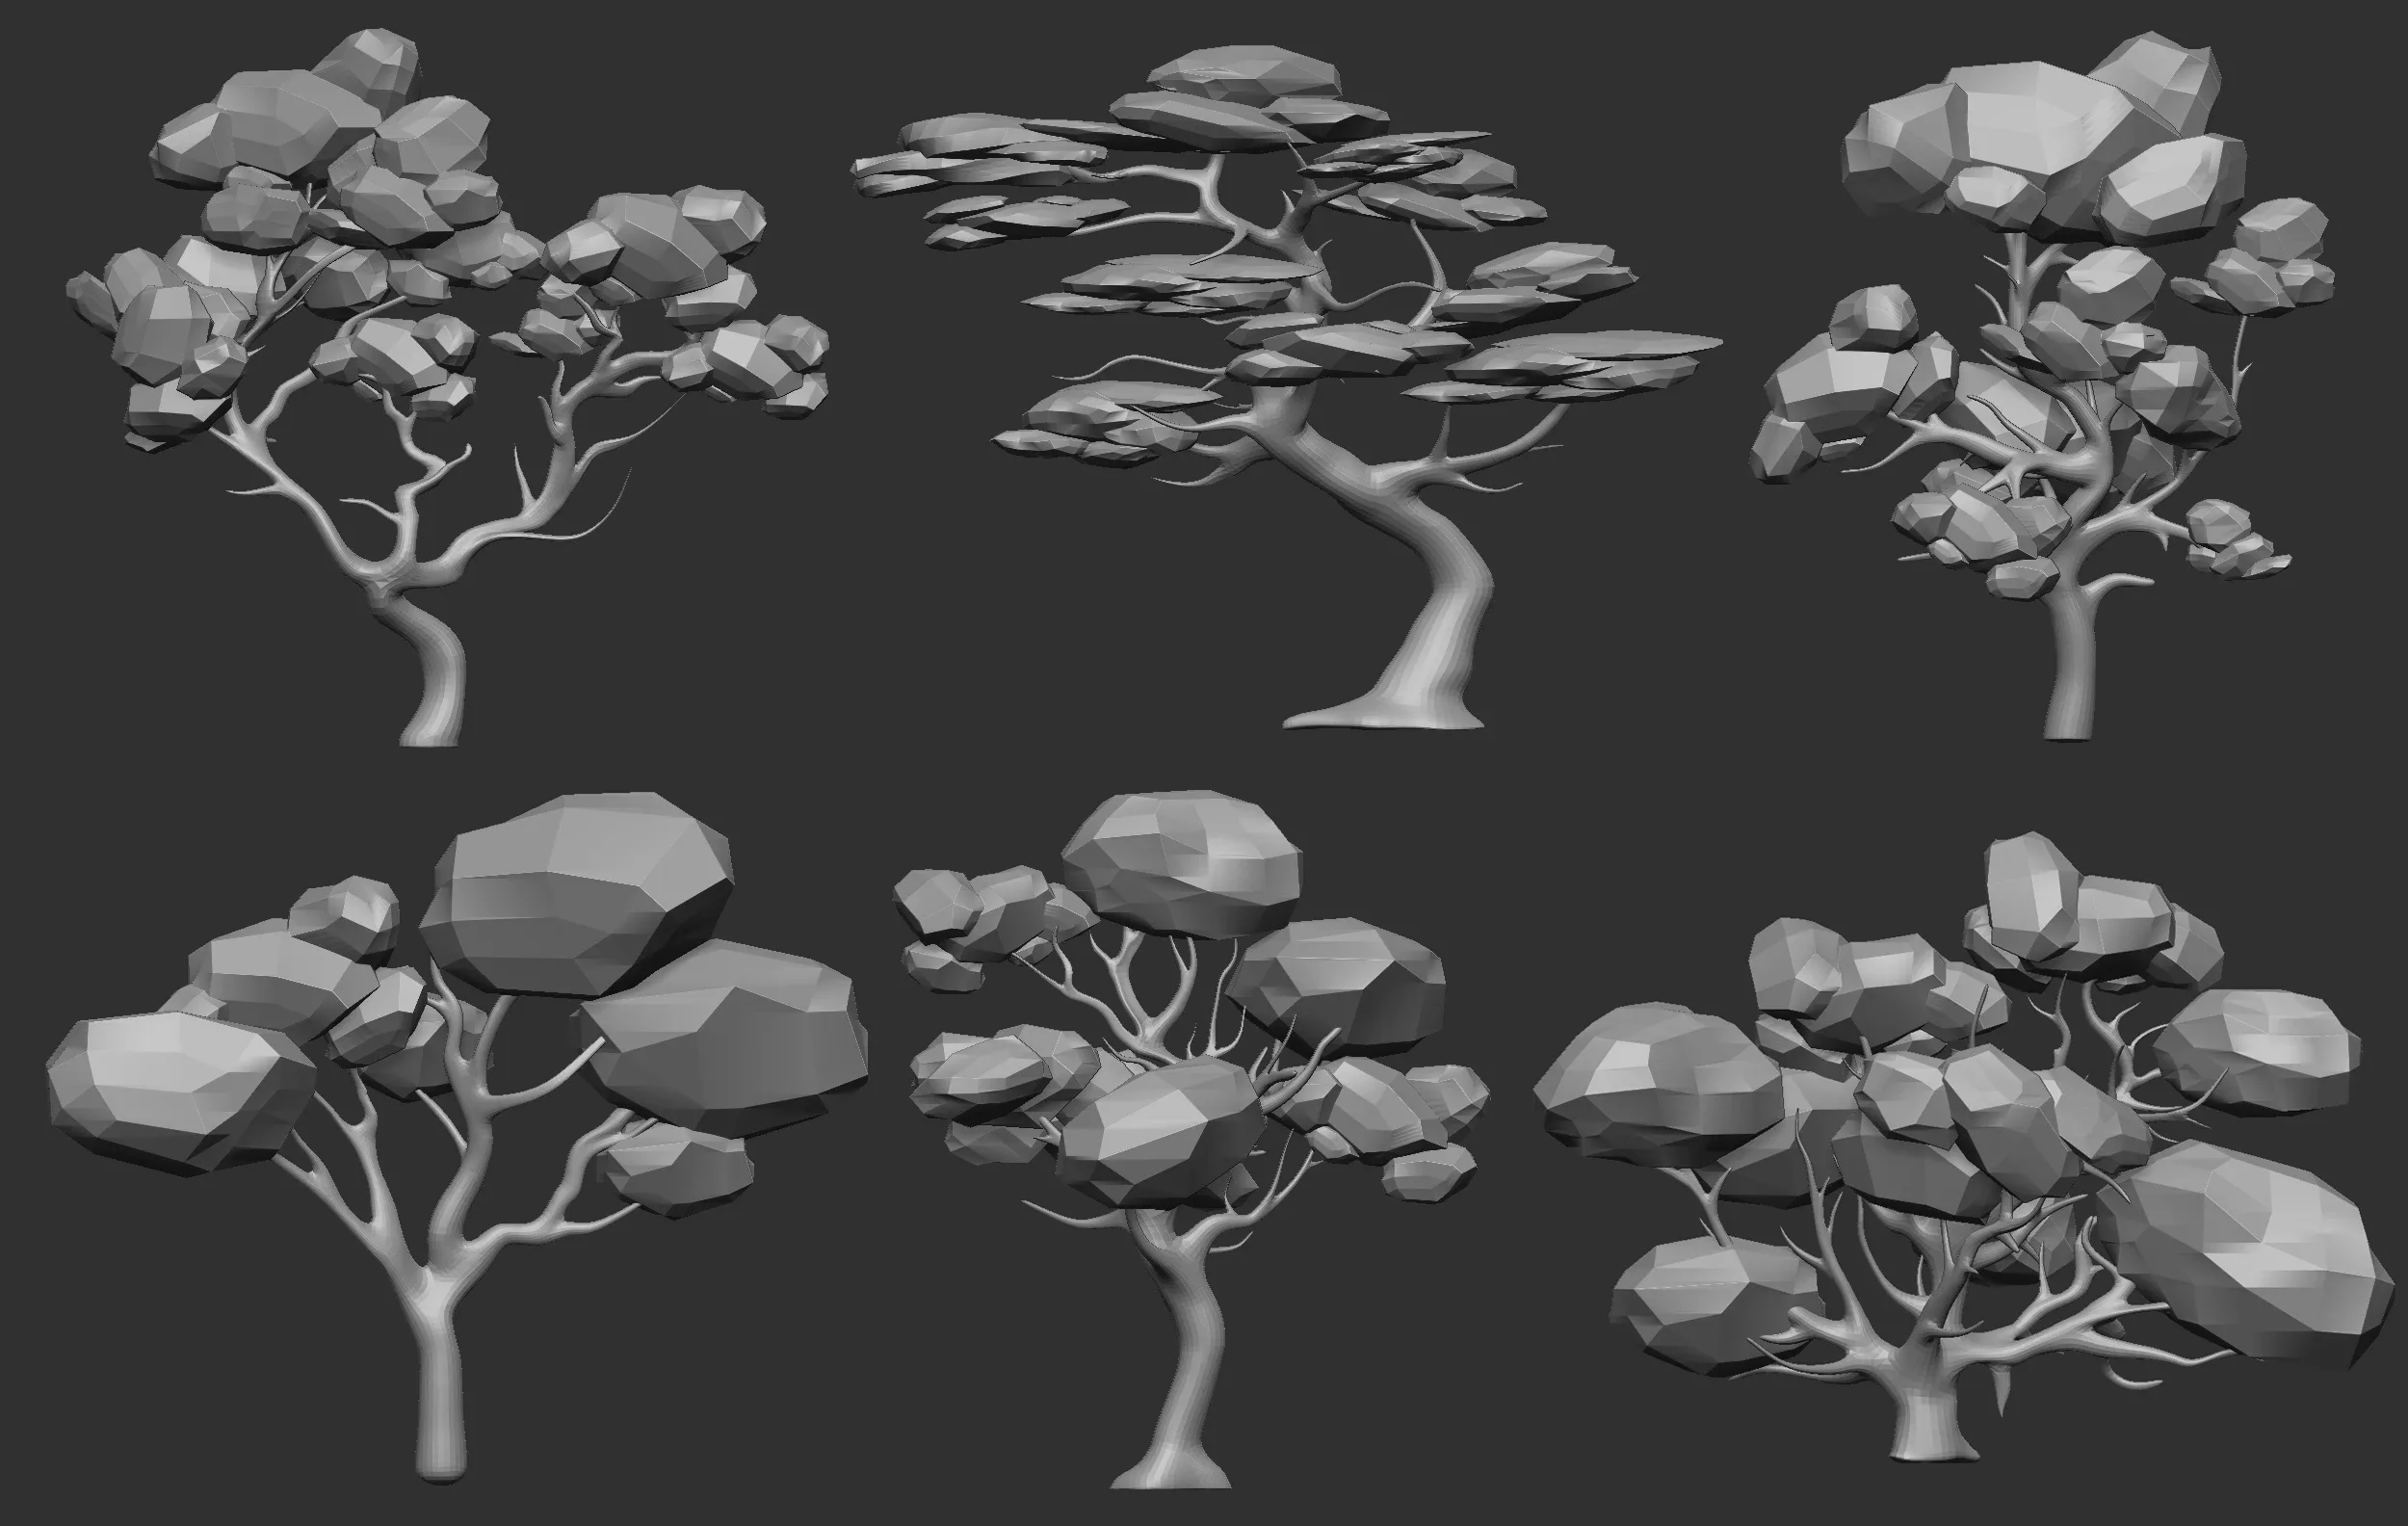 30 Low poly tree and bush base mesh shapes IMM brush set for Zbrush, FBX and OBJ files.